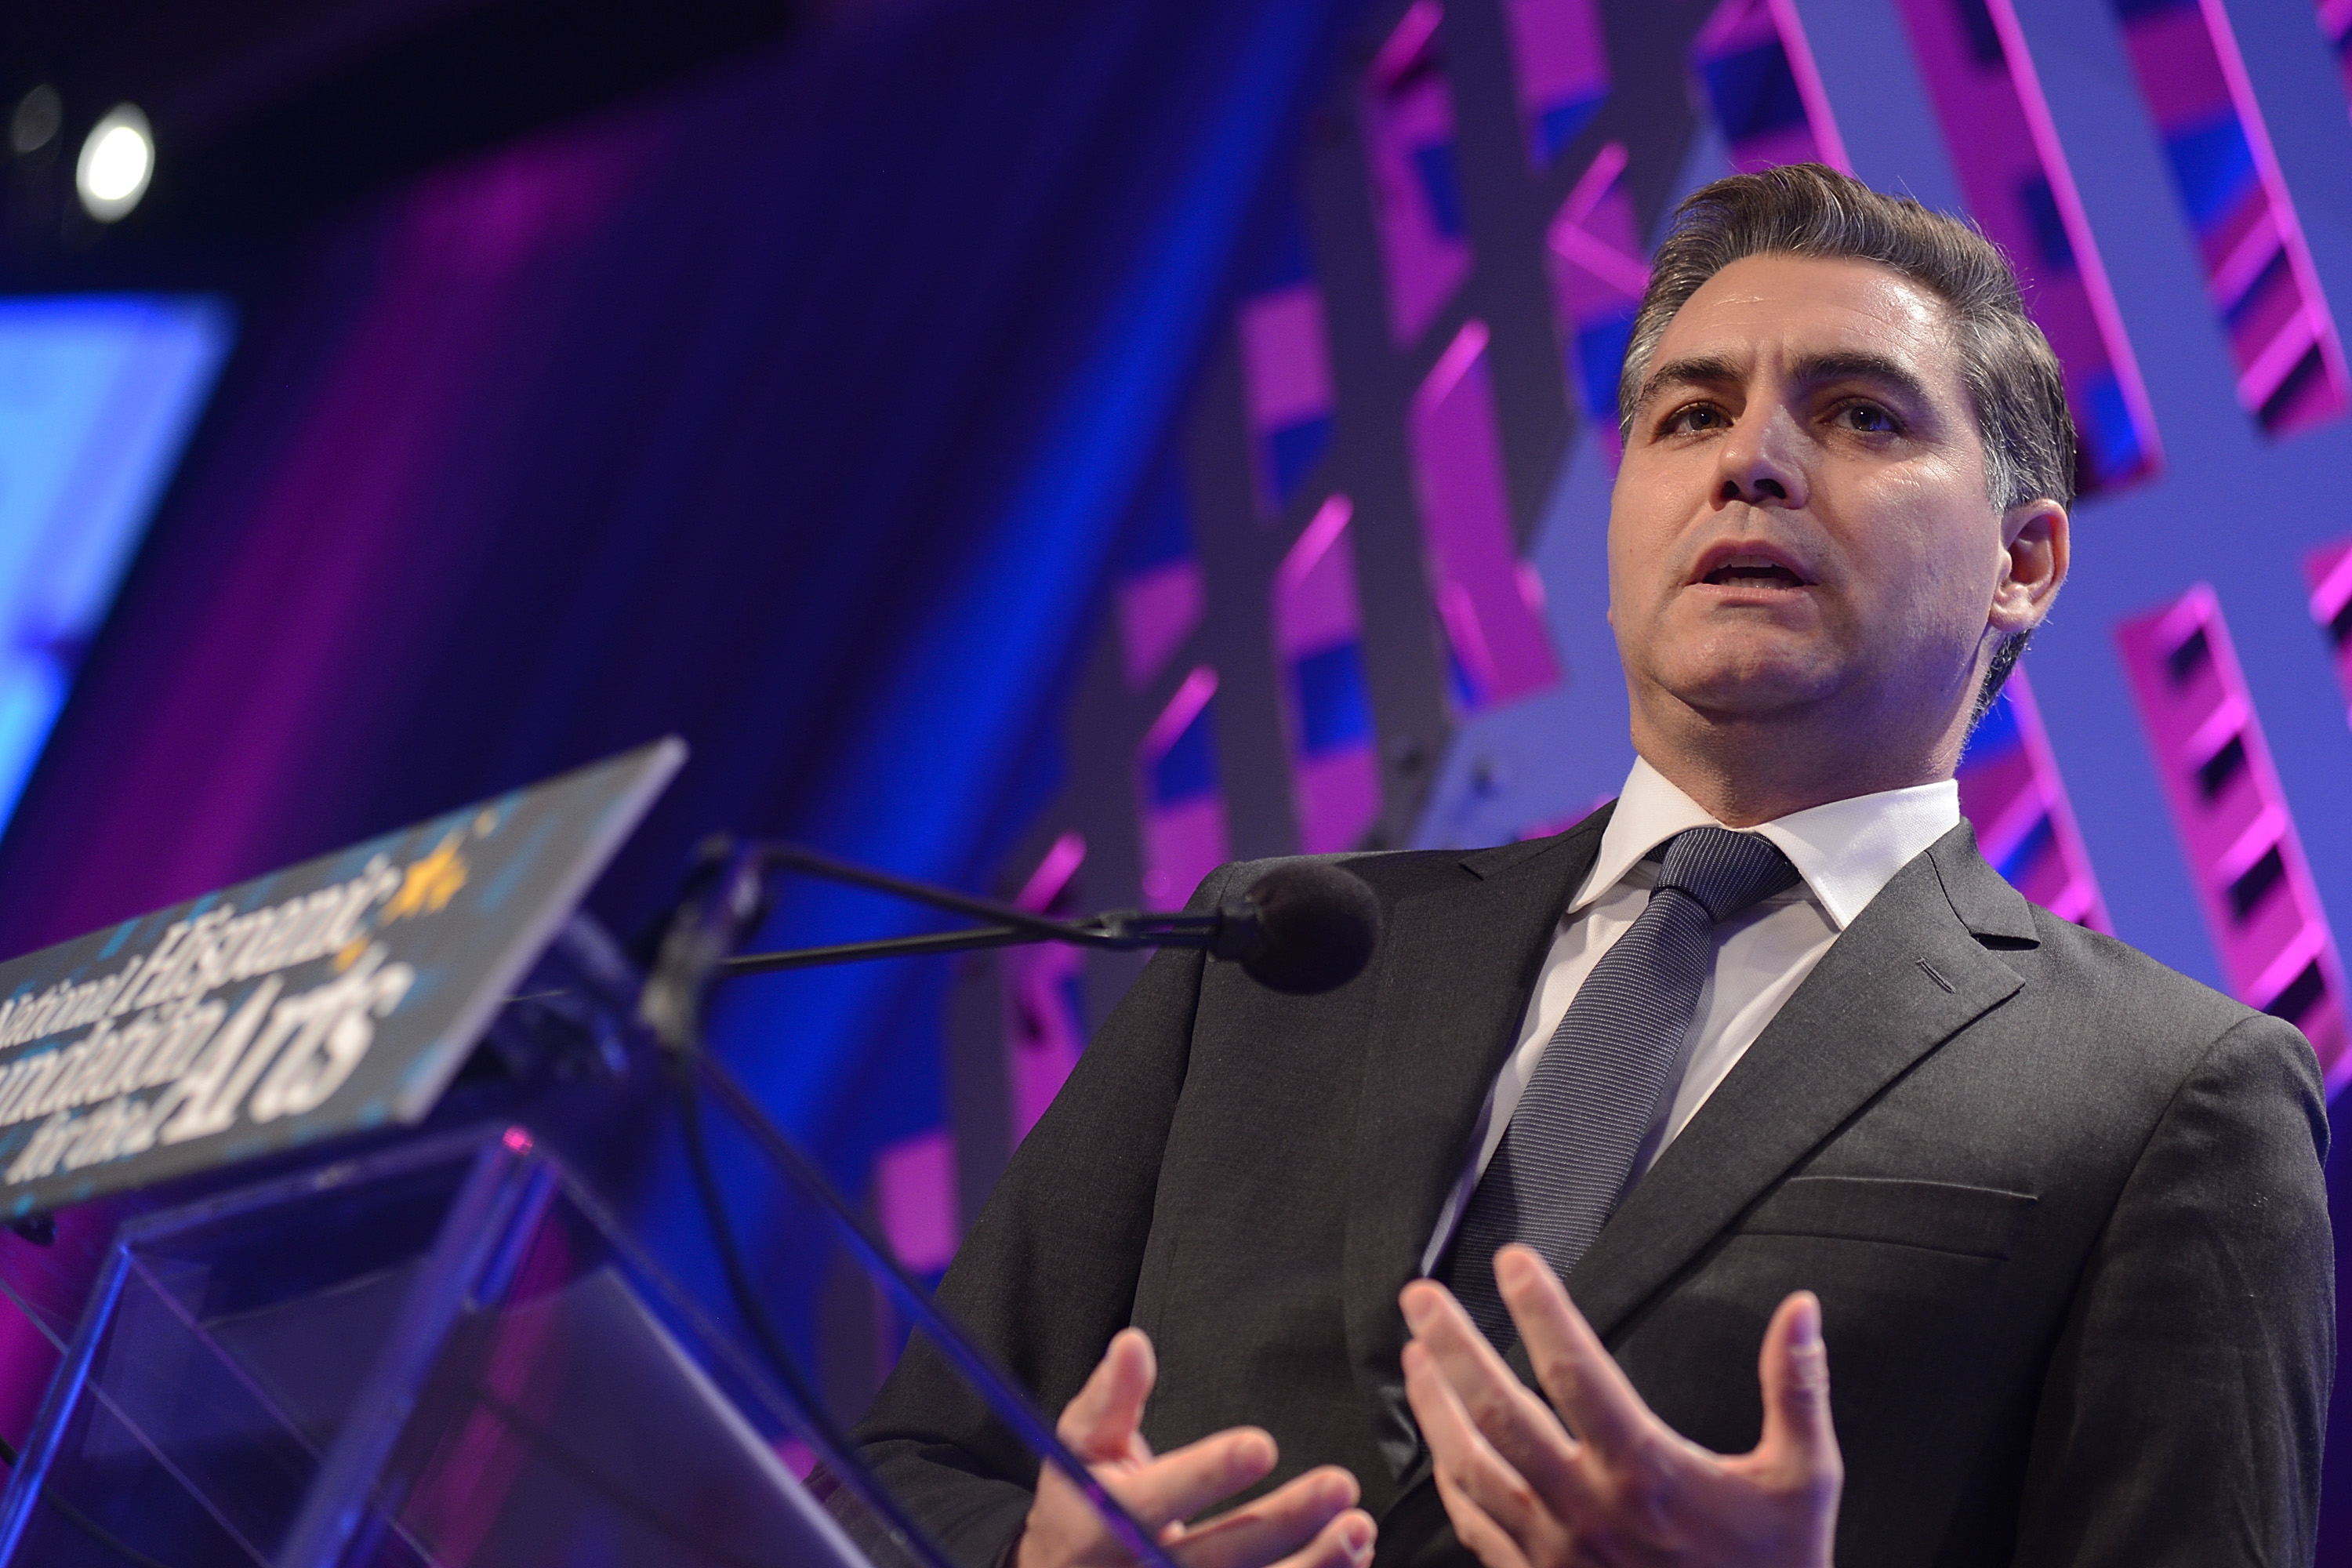 WASHINGTON, DC - SEPTEMBER 11: CNN's Jim Acosta attends the National Hispanic Foundation for the Arts 2017 Noche de Gala at The Mayflower Hotel on September 11, 2017 in Washington, DC. (Photo by Shannon Finney/Getty Images for National Hispanic Foundation For The Arts)